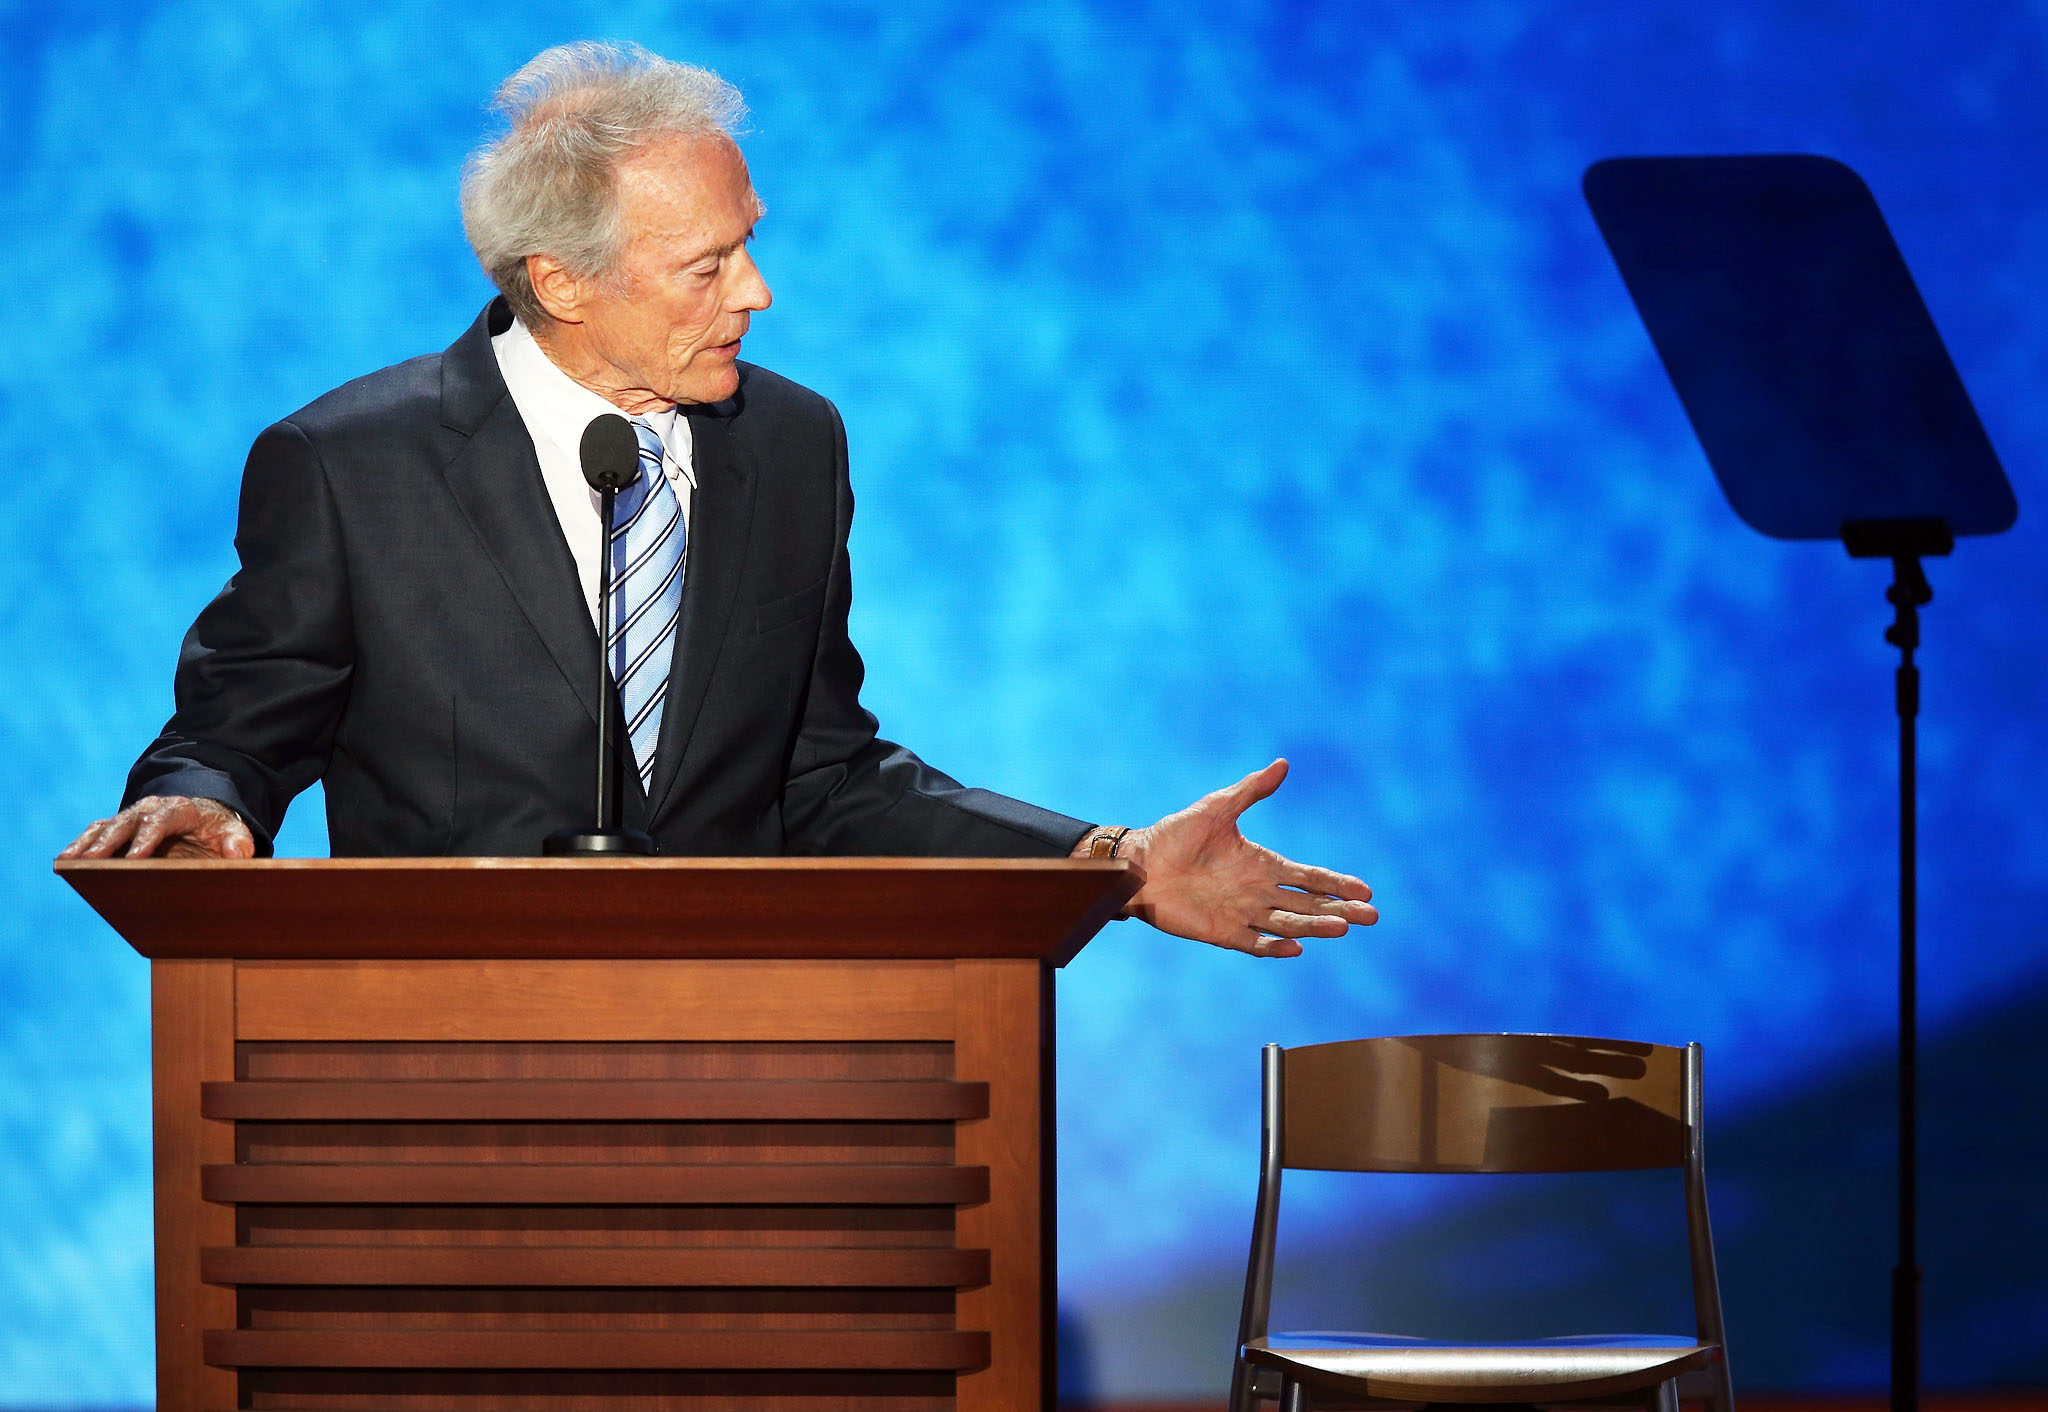 election-all-stars-clint-eastwood1.jpg